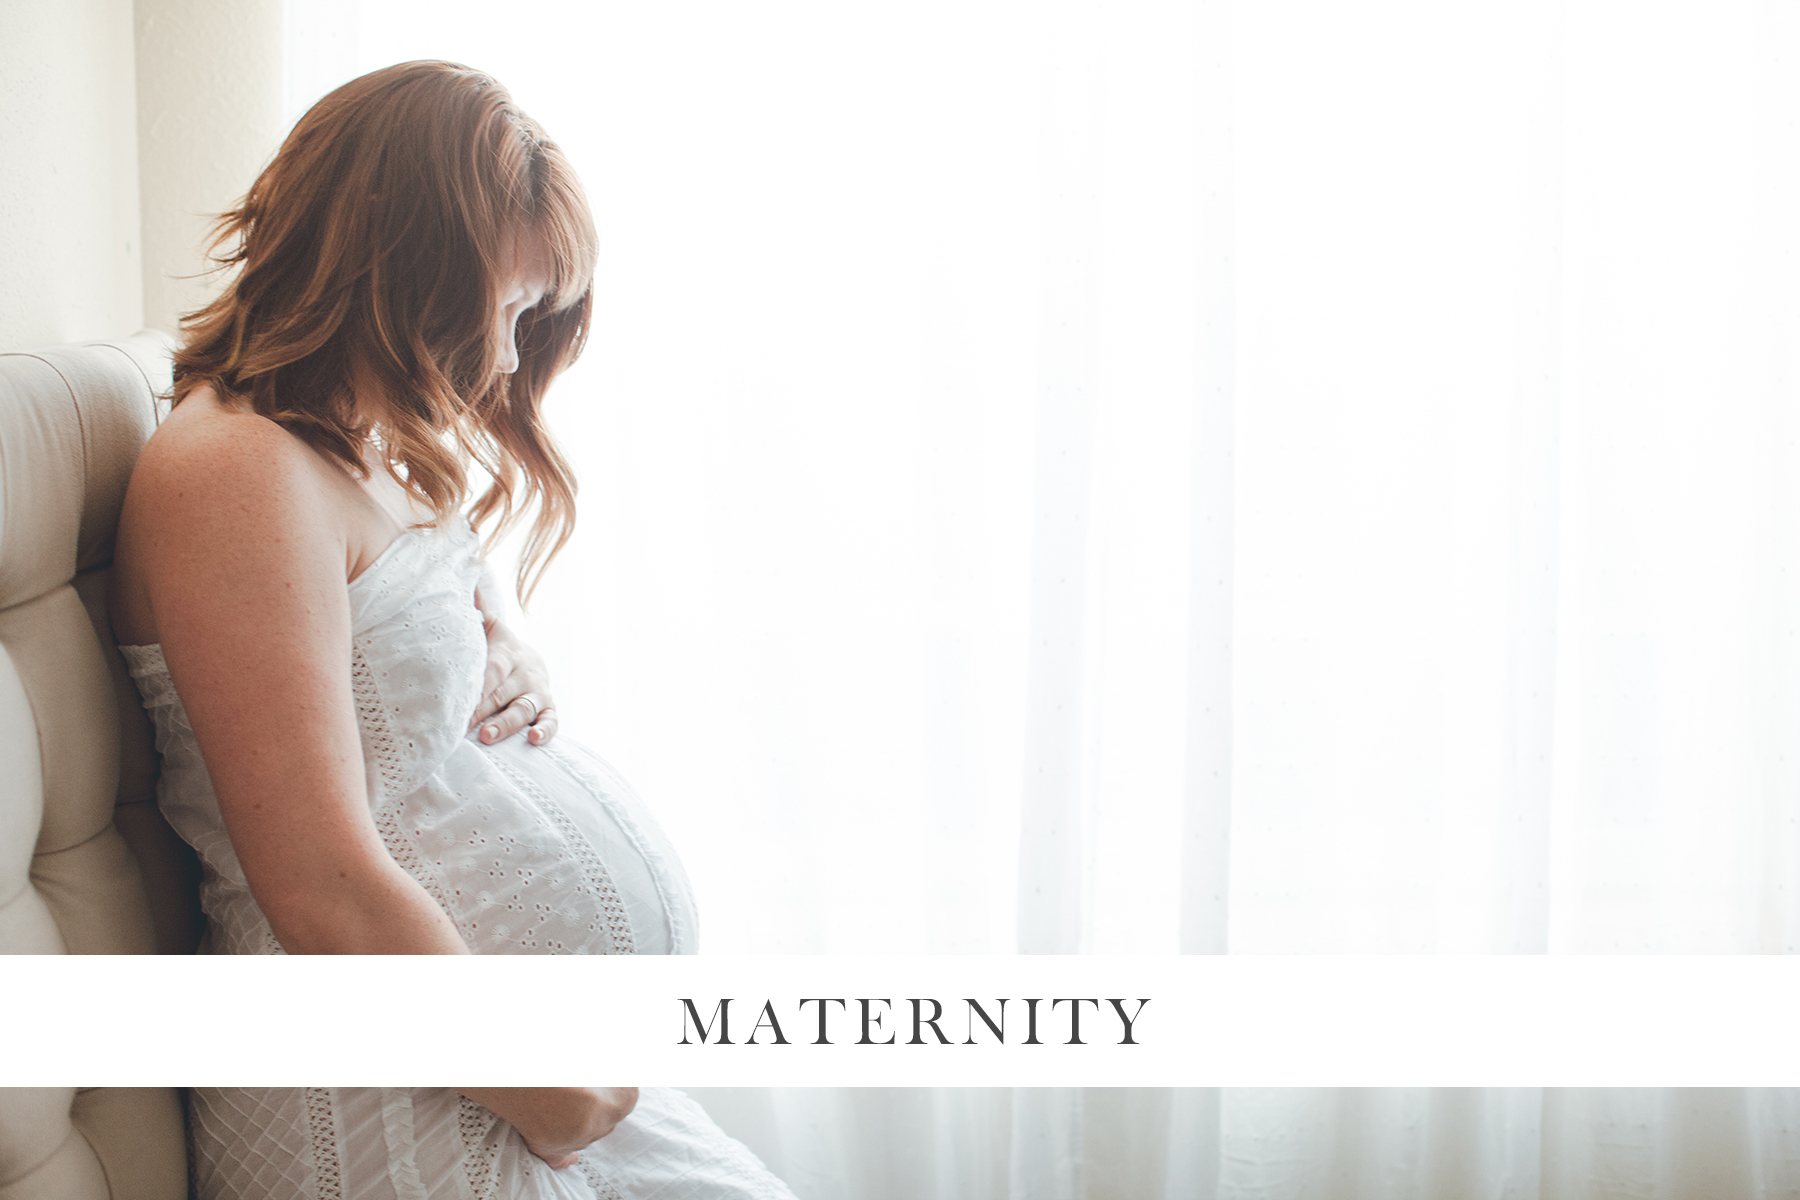 Boulder maternity photographer and Denver newborn photographer specializes in simple and natural newborn and maternity photography.